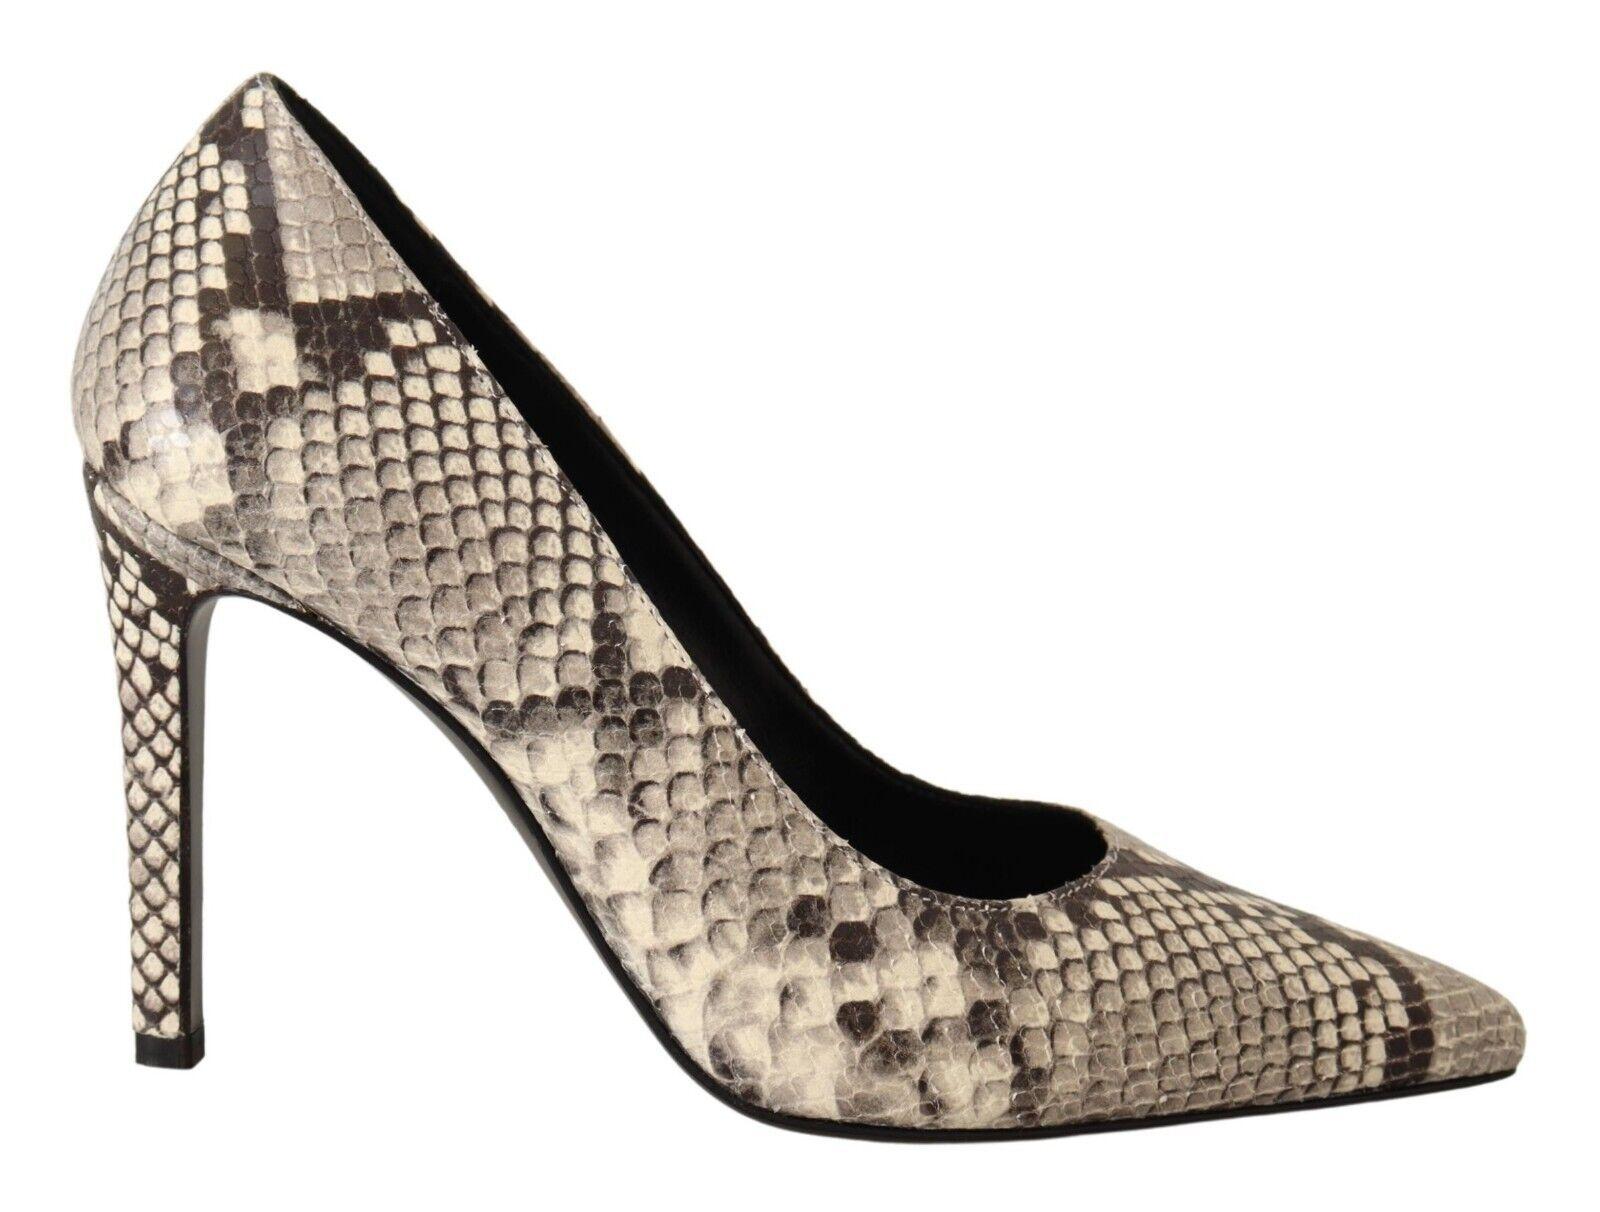 Paige Lydia Block Heel In Black/white Snake - ShopStyle Pumps